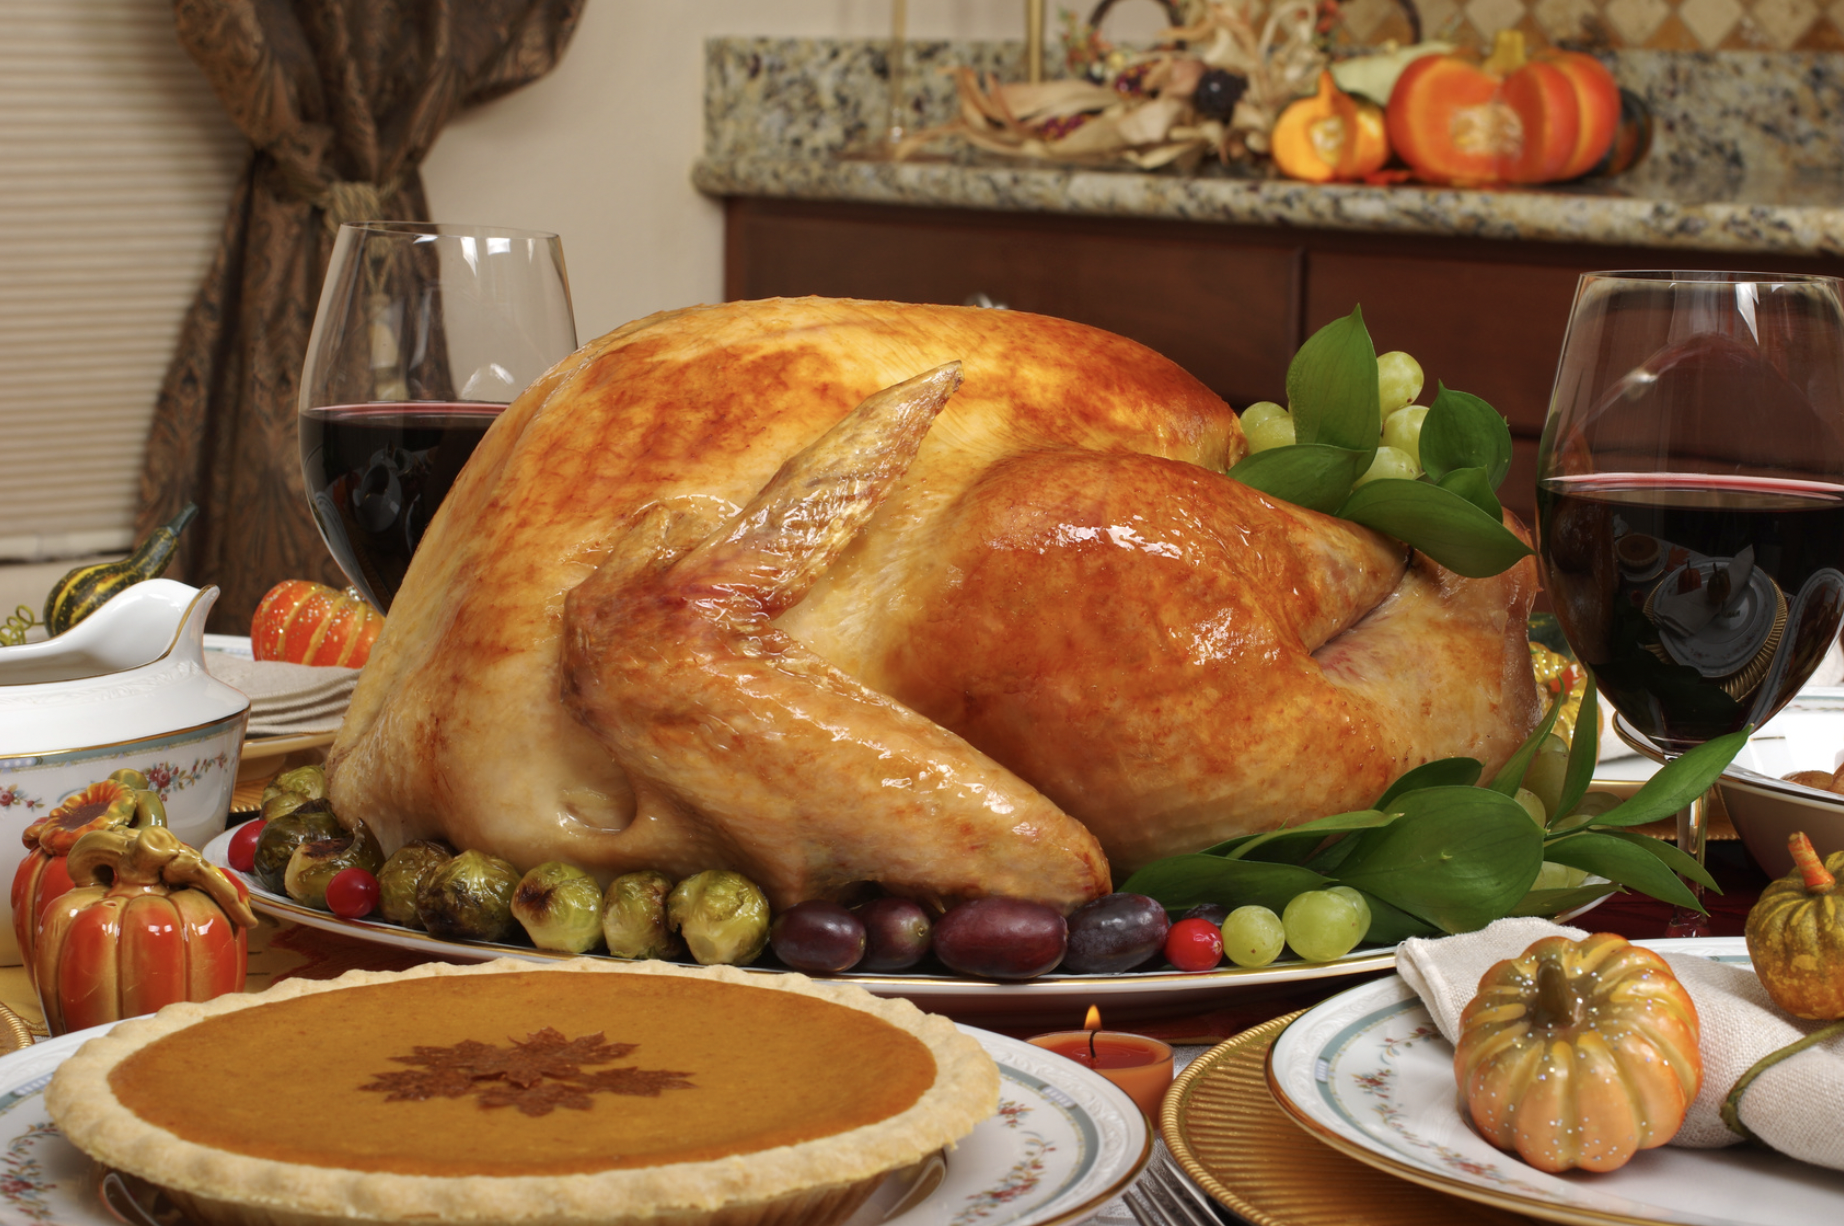 Turkey on the table | Source: Shutterstock